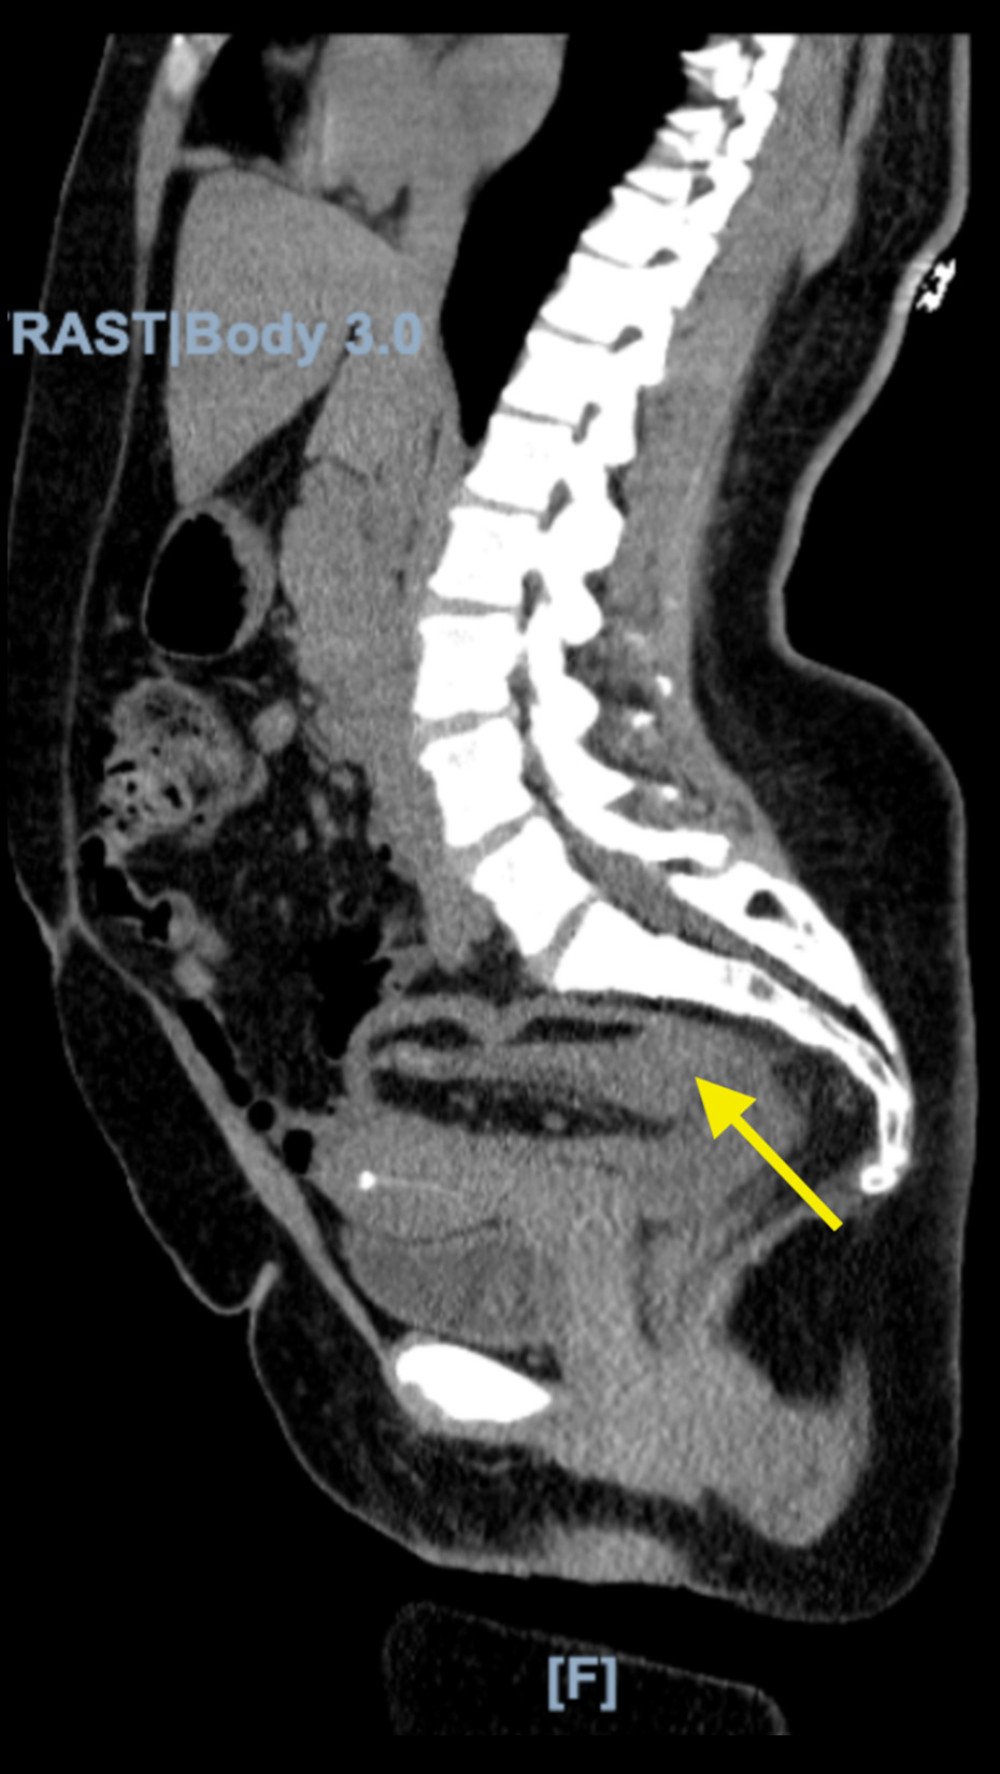 Computed tomography of the abdomen and pelvis without contrast showing an arrow pointing to the region of colo-colonic intussusception.